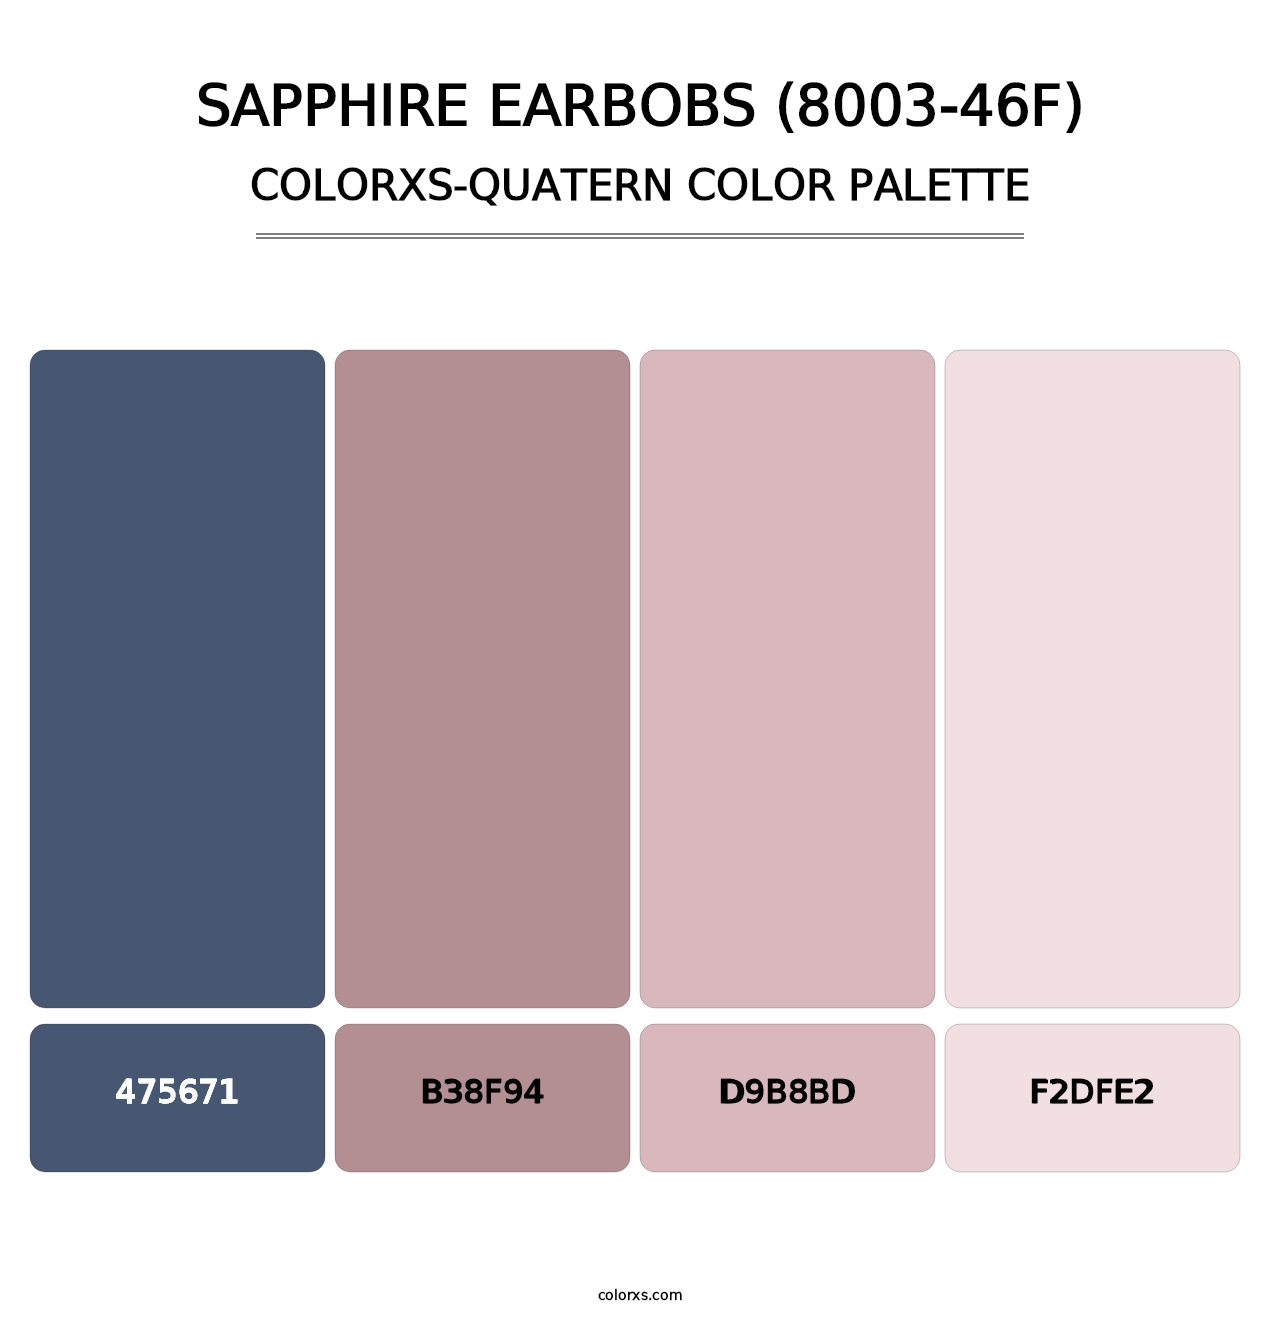 Sapphire Earbobs (8003-46F) - Colorxs Quatern Palette